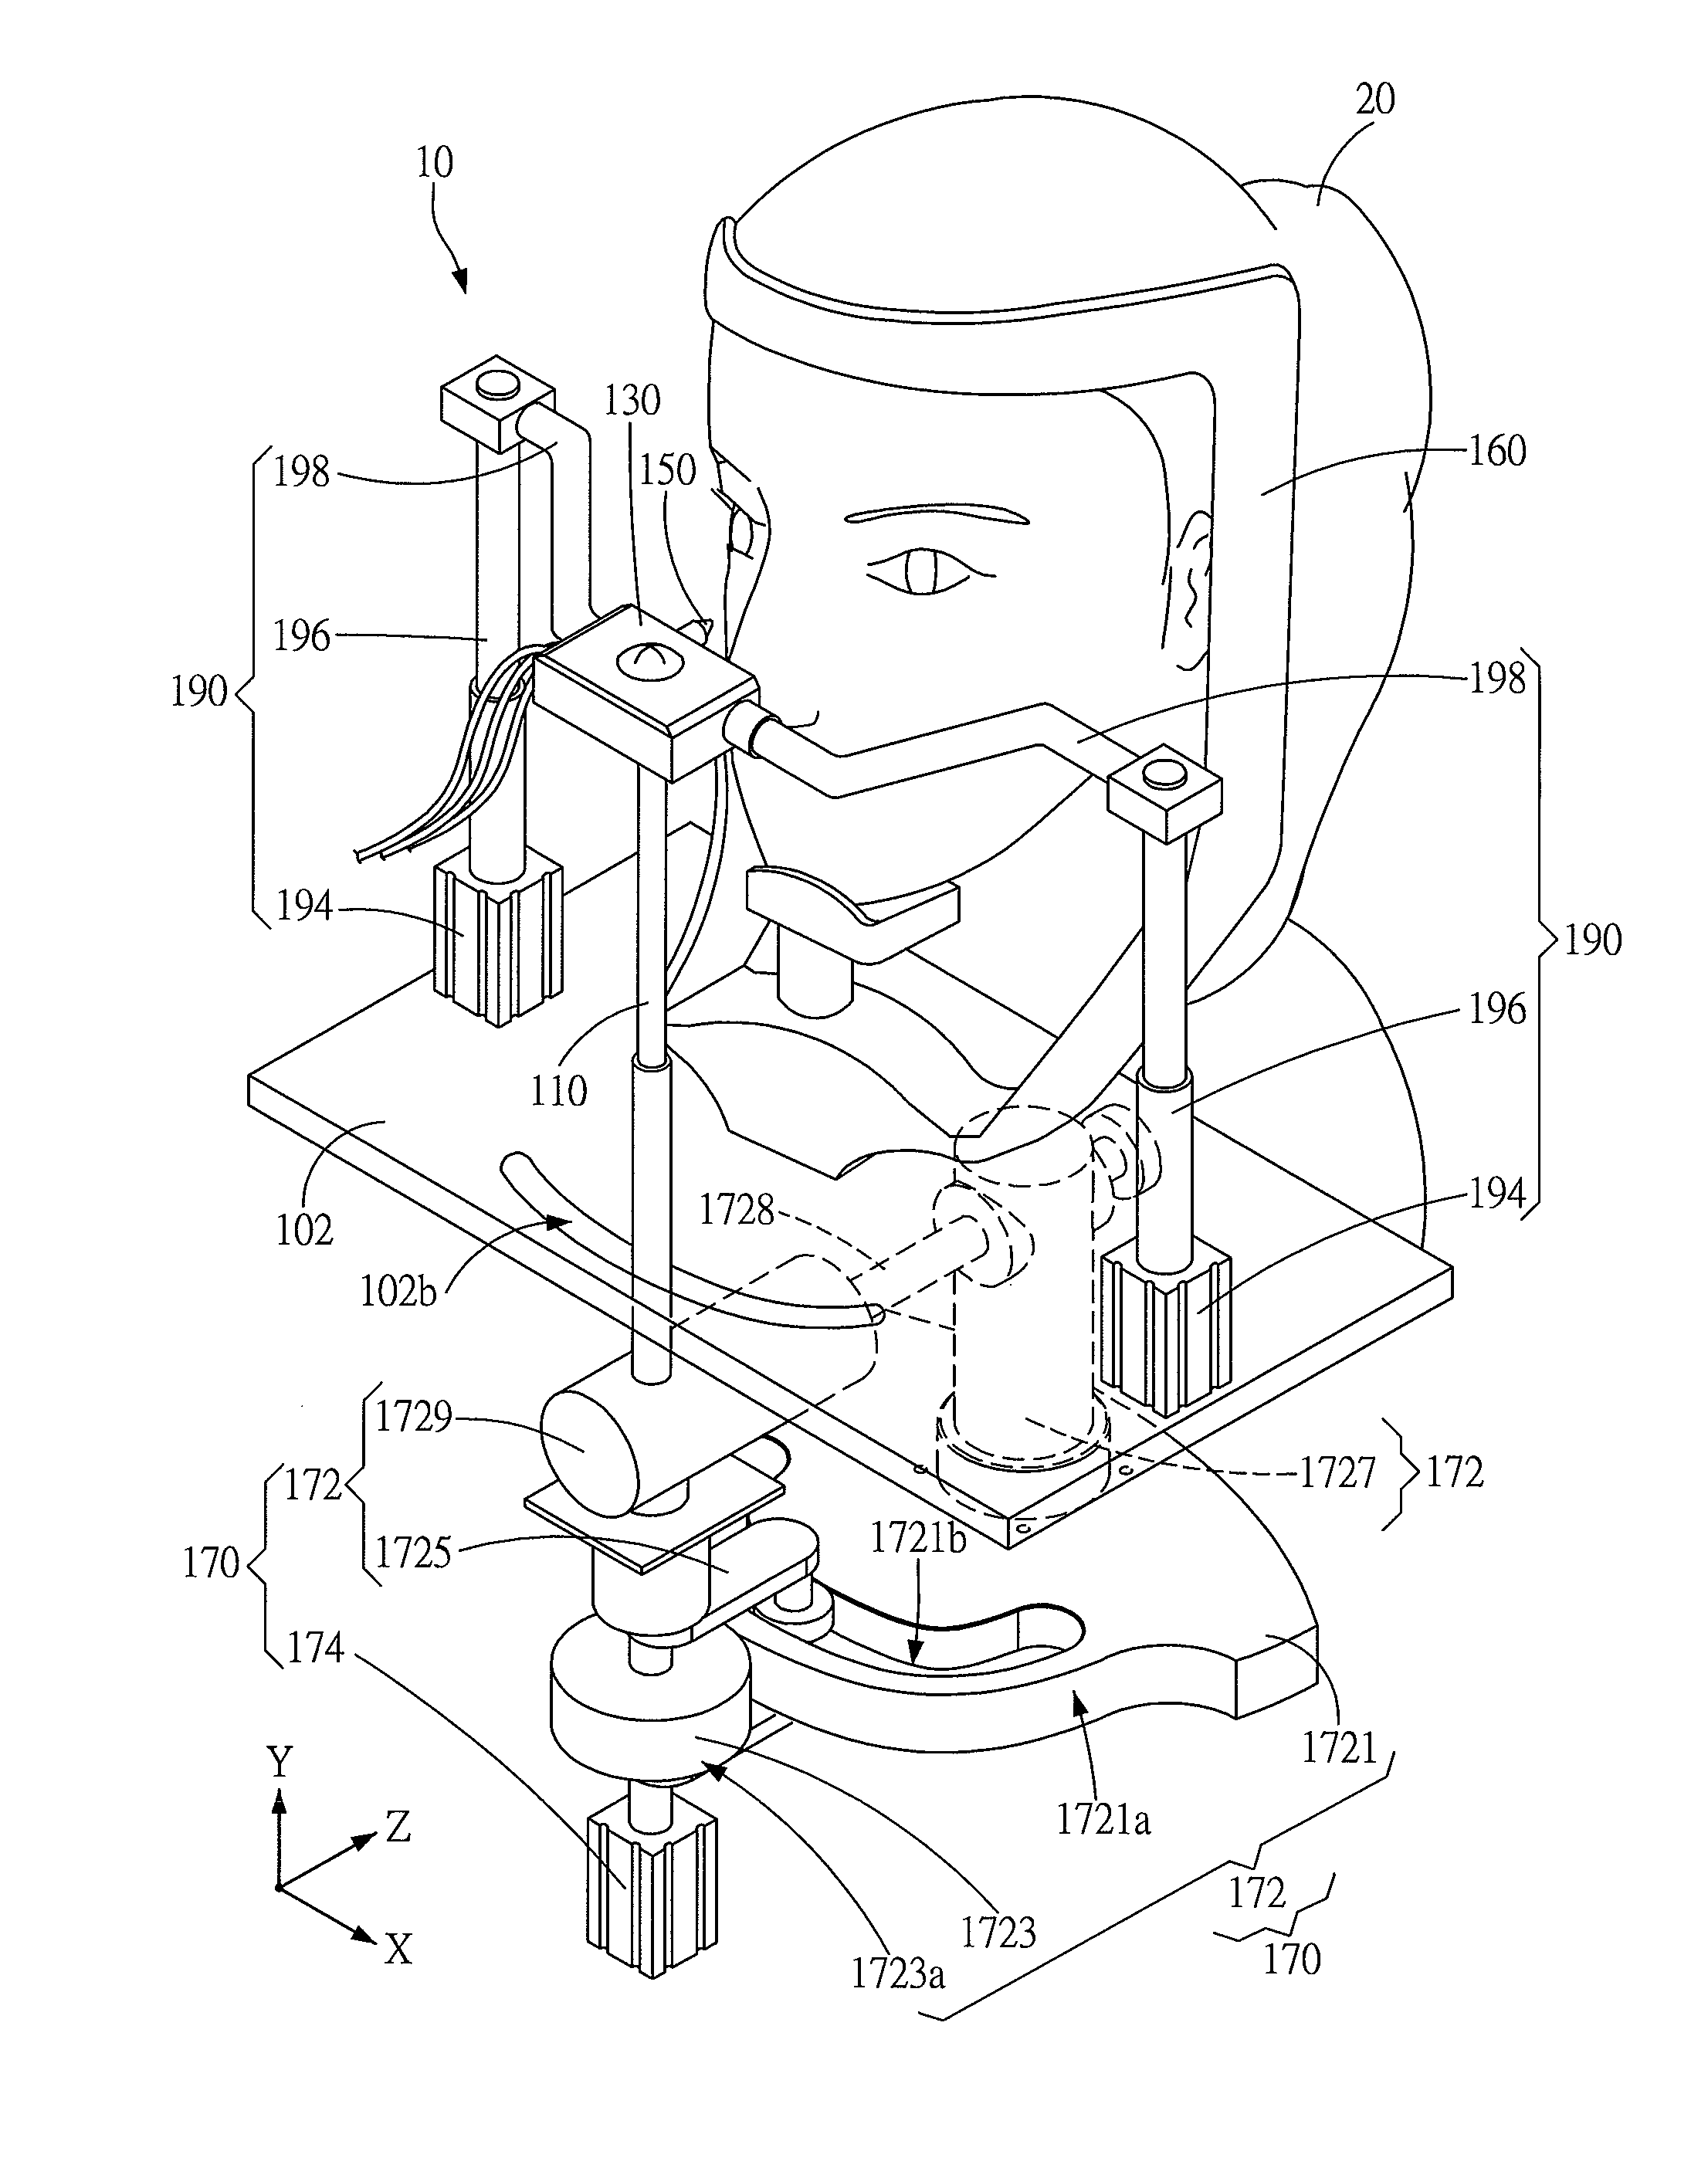 Automatic coloring device for moving coloring tool along a curve